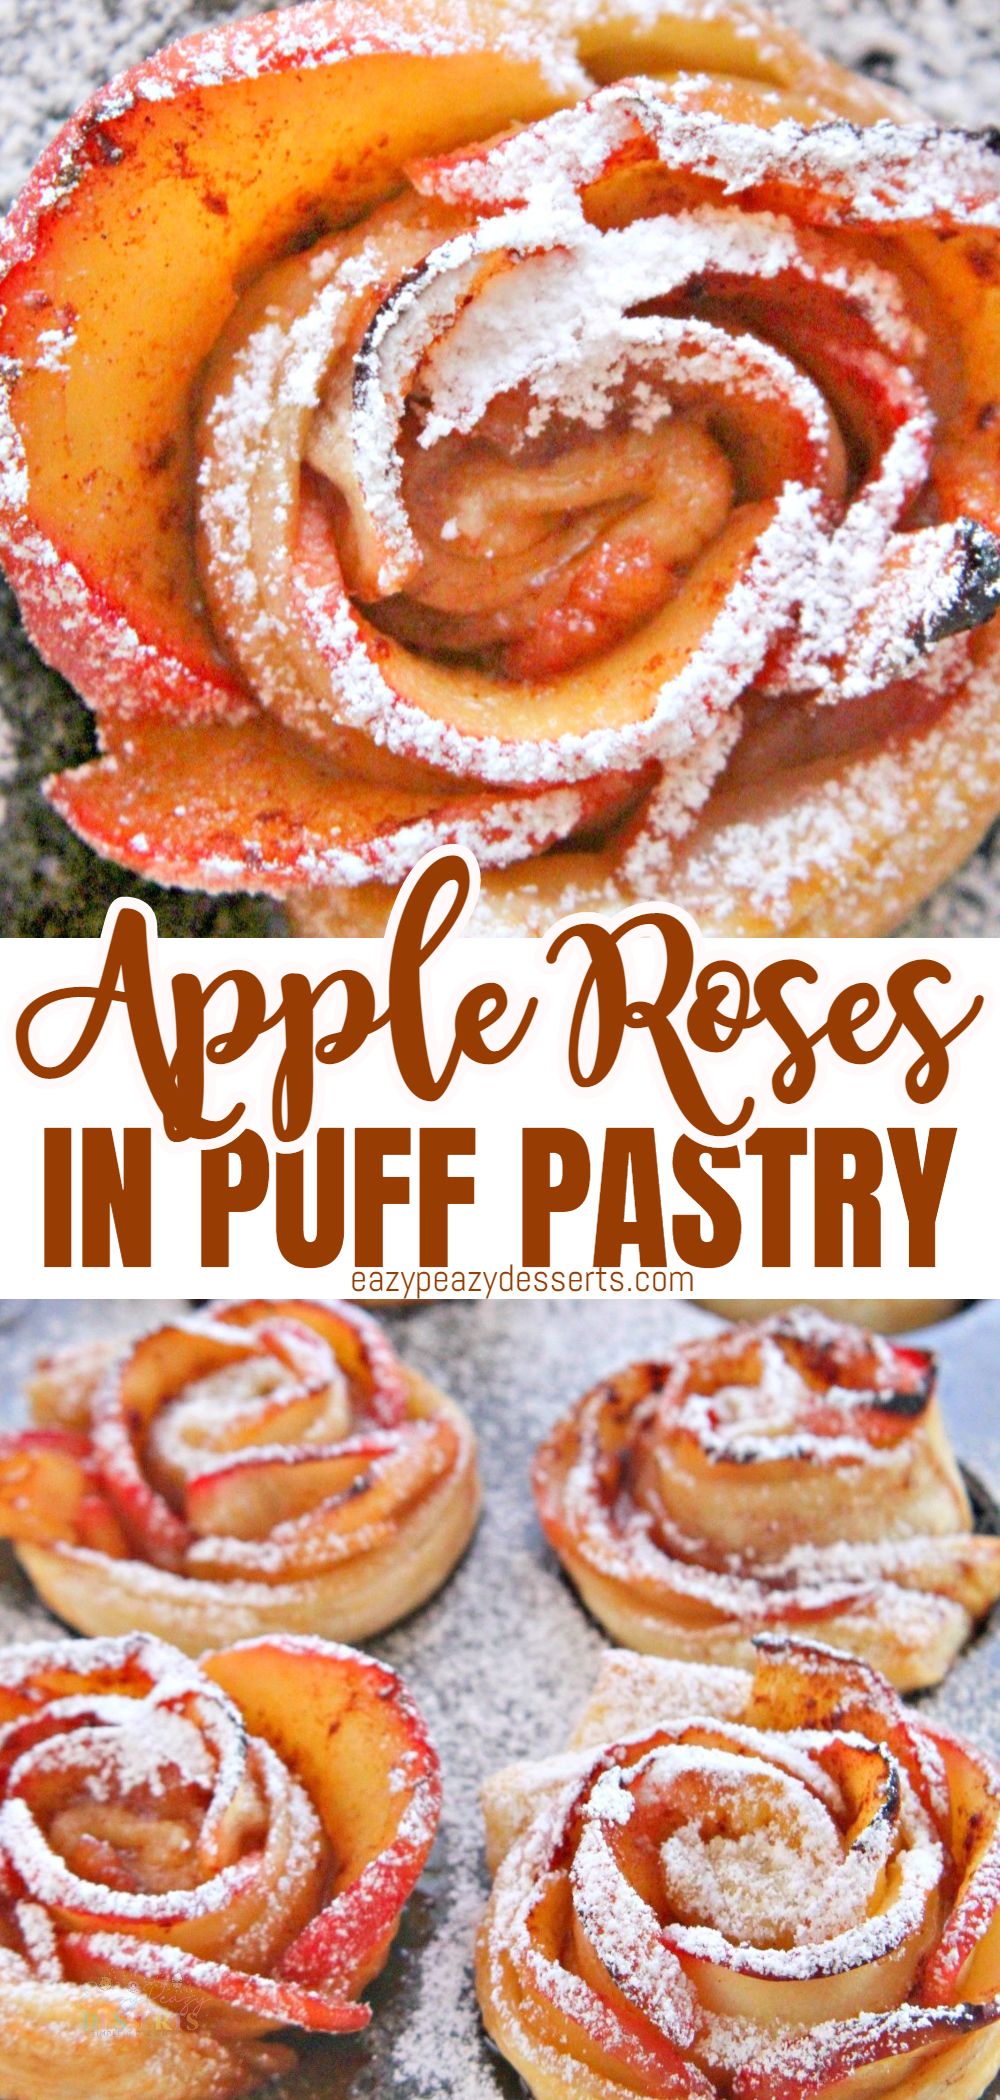 Apple roses pastry